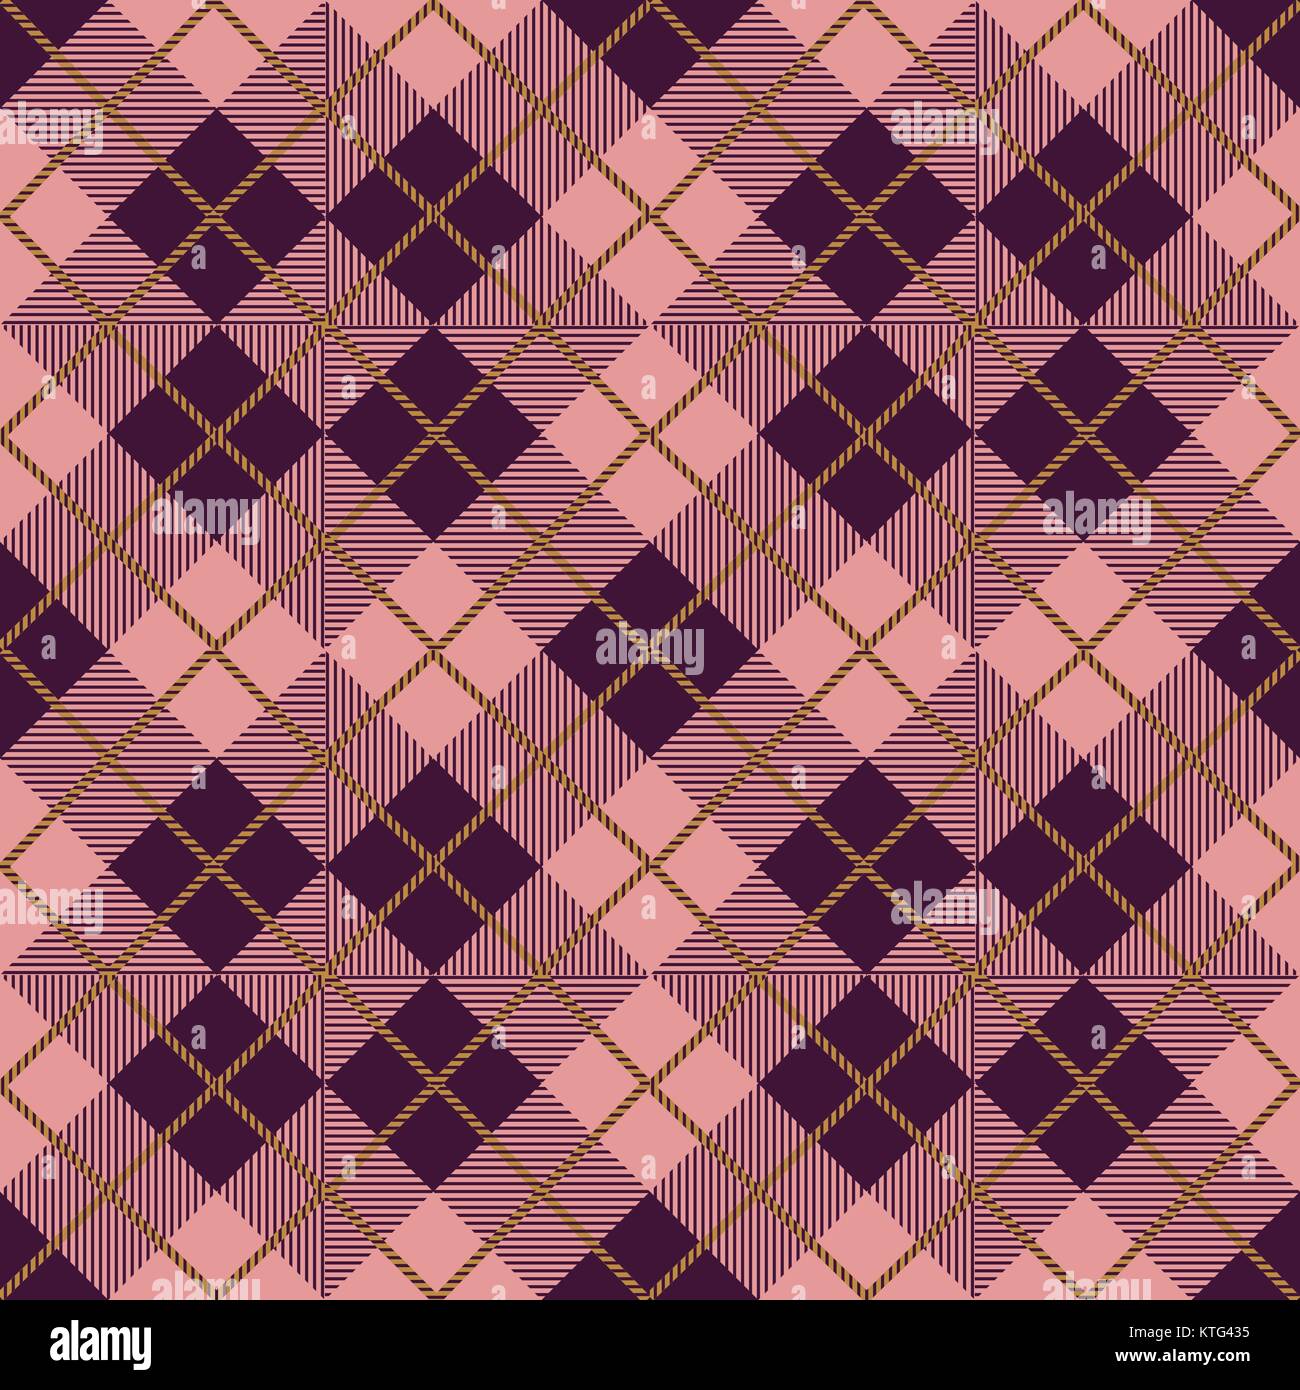 Seamless background image of vintage diamond check pattern. Stock Vector